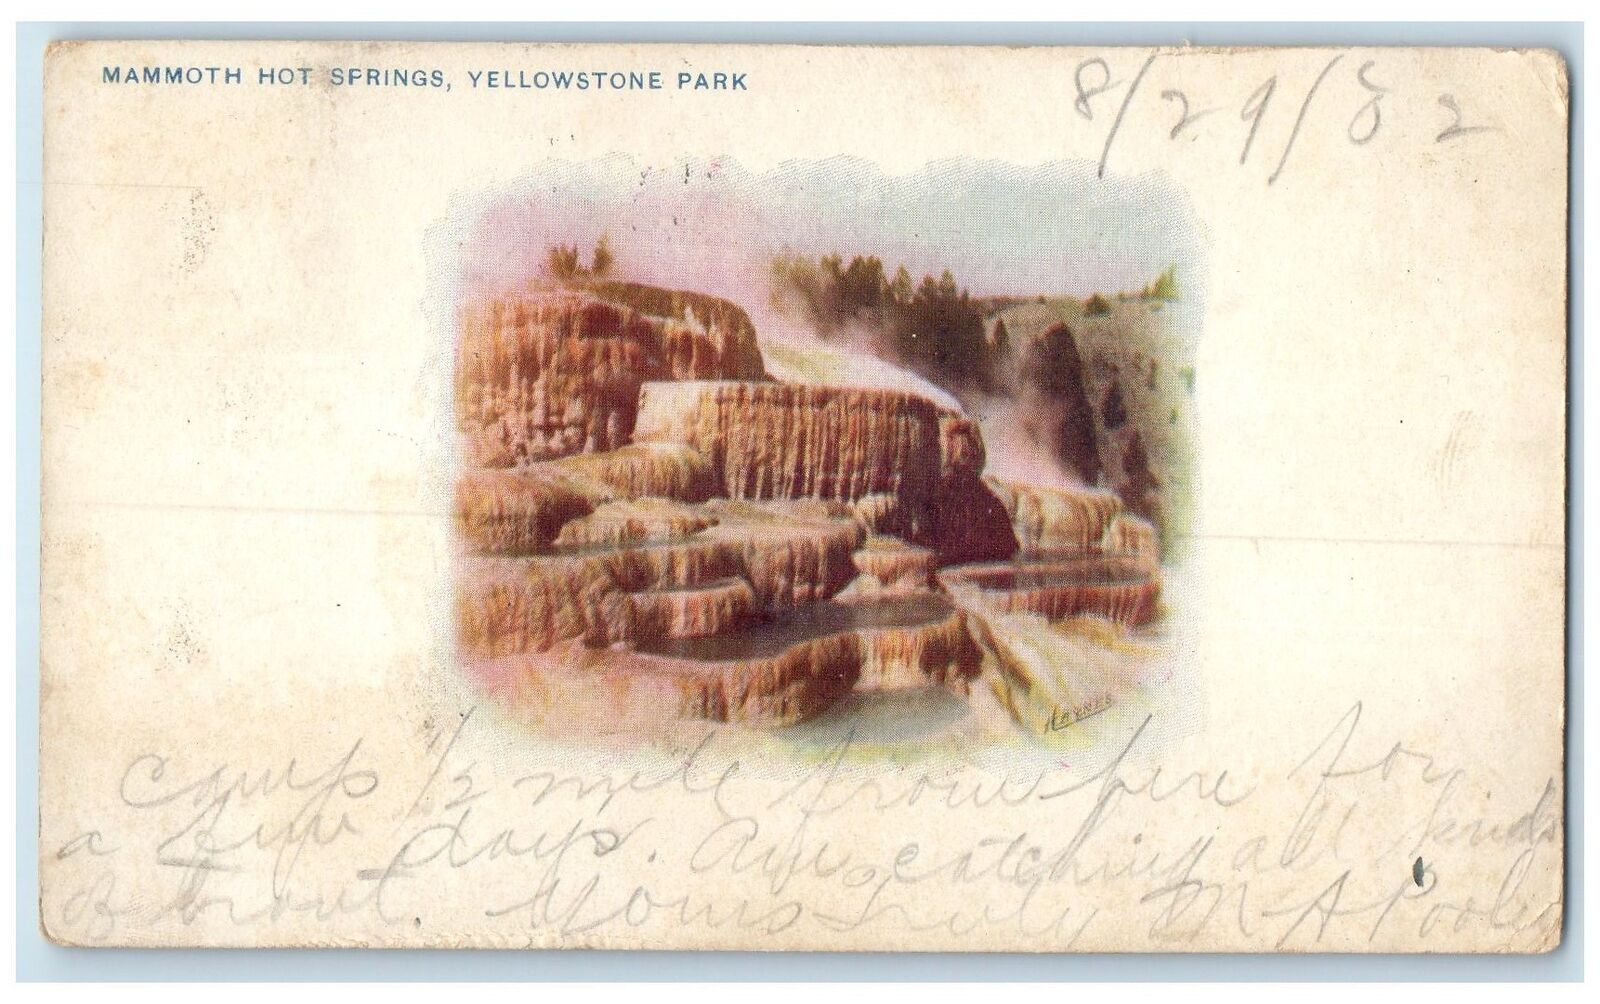 1902 Mammoth Hot Springs Yellowstone Park Rock Formation Hills Posted Postcard